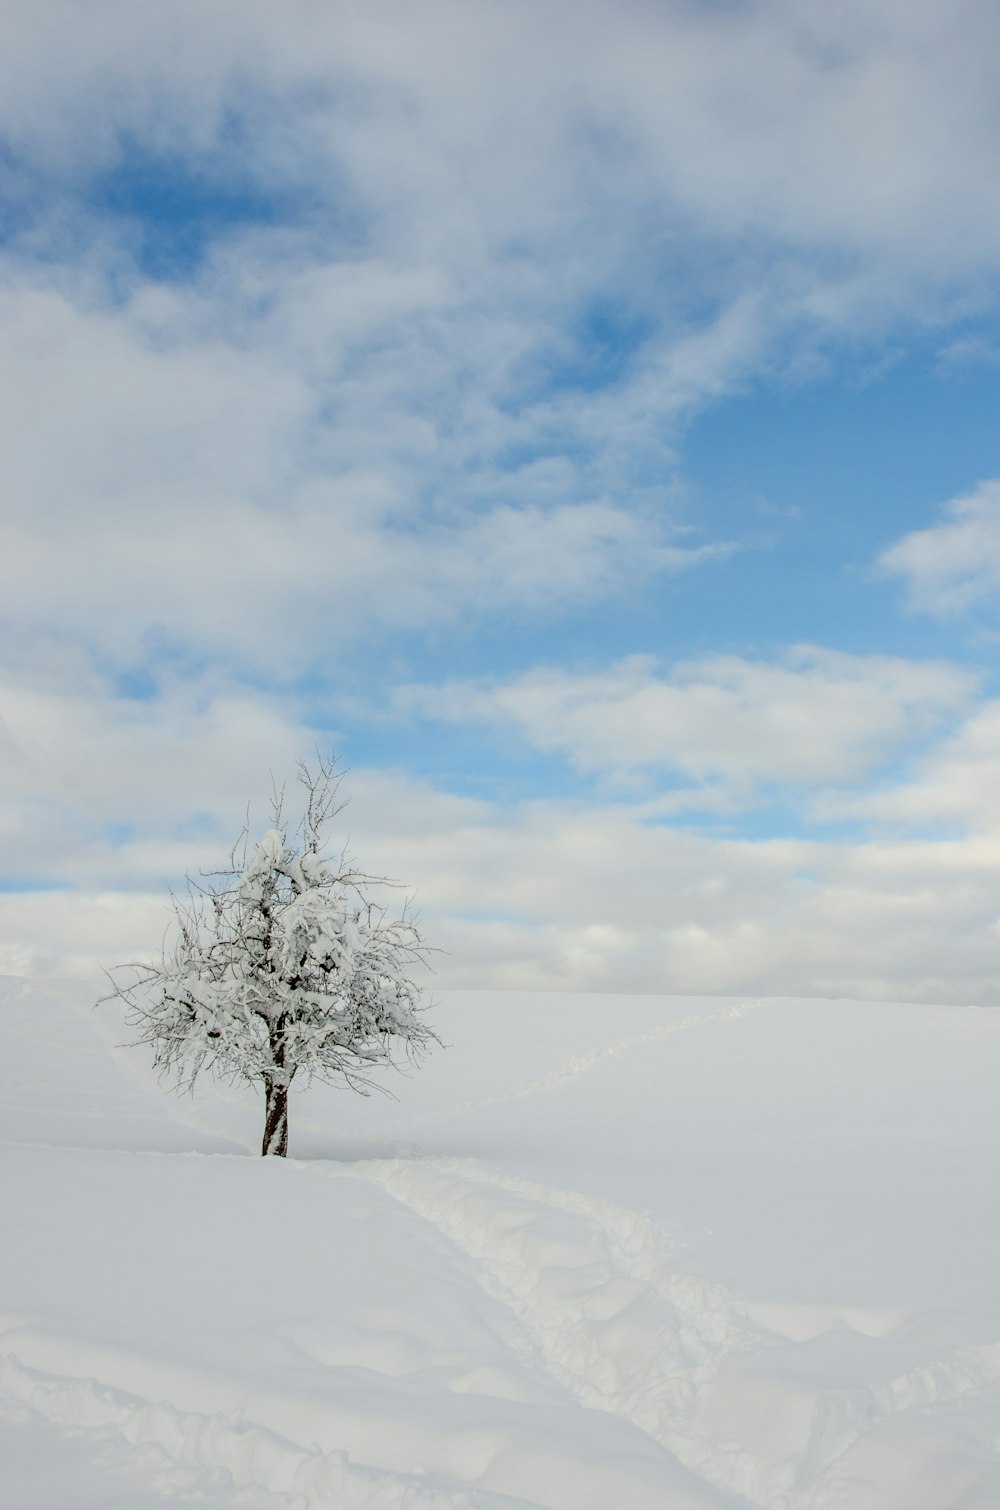 leafless tree on white snow covered ground under white cloudy sky during daytime